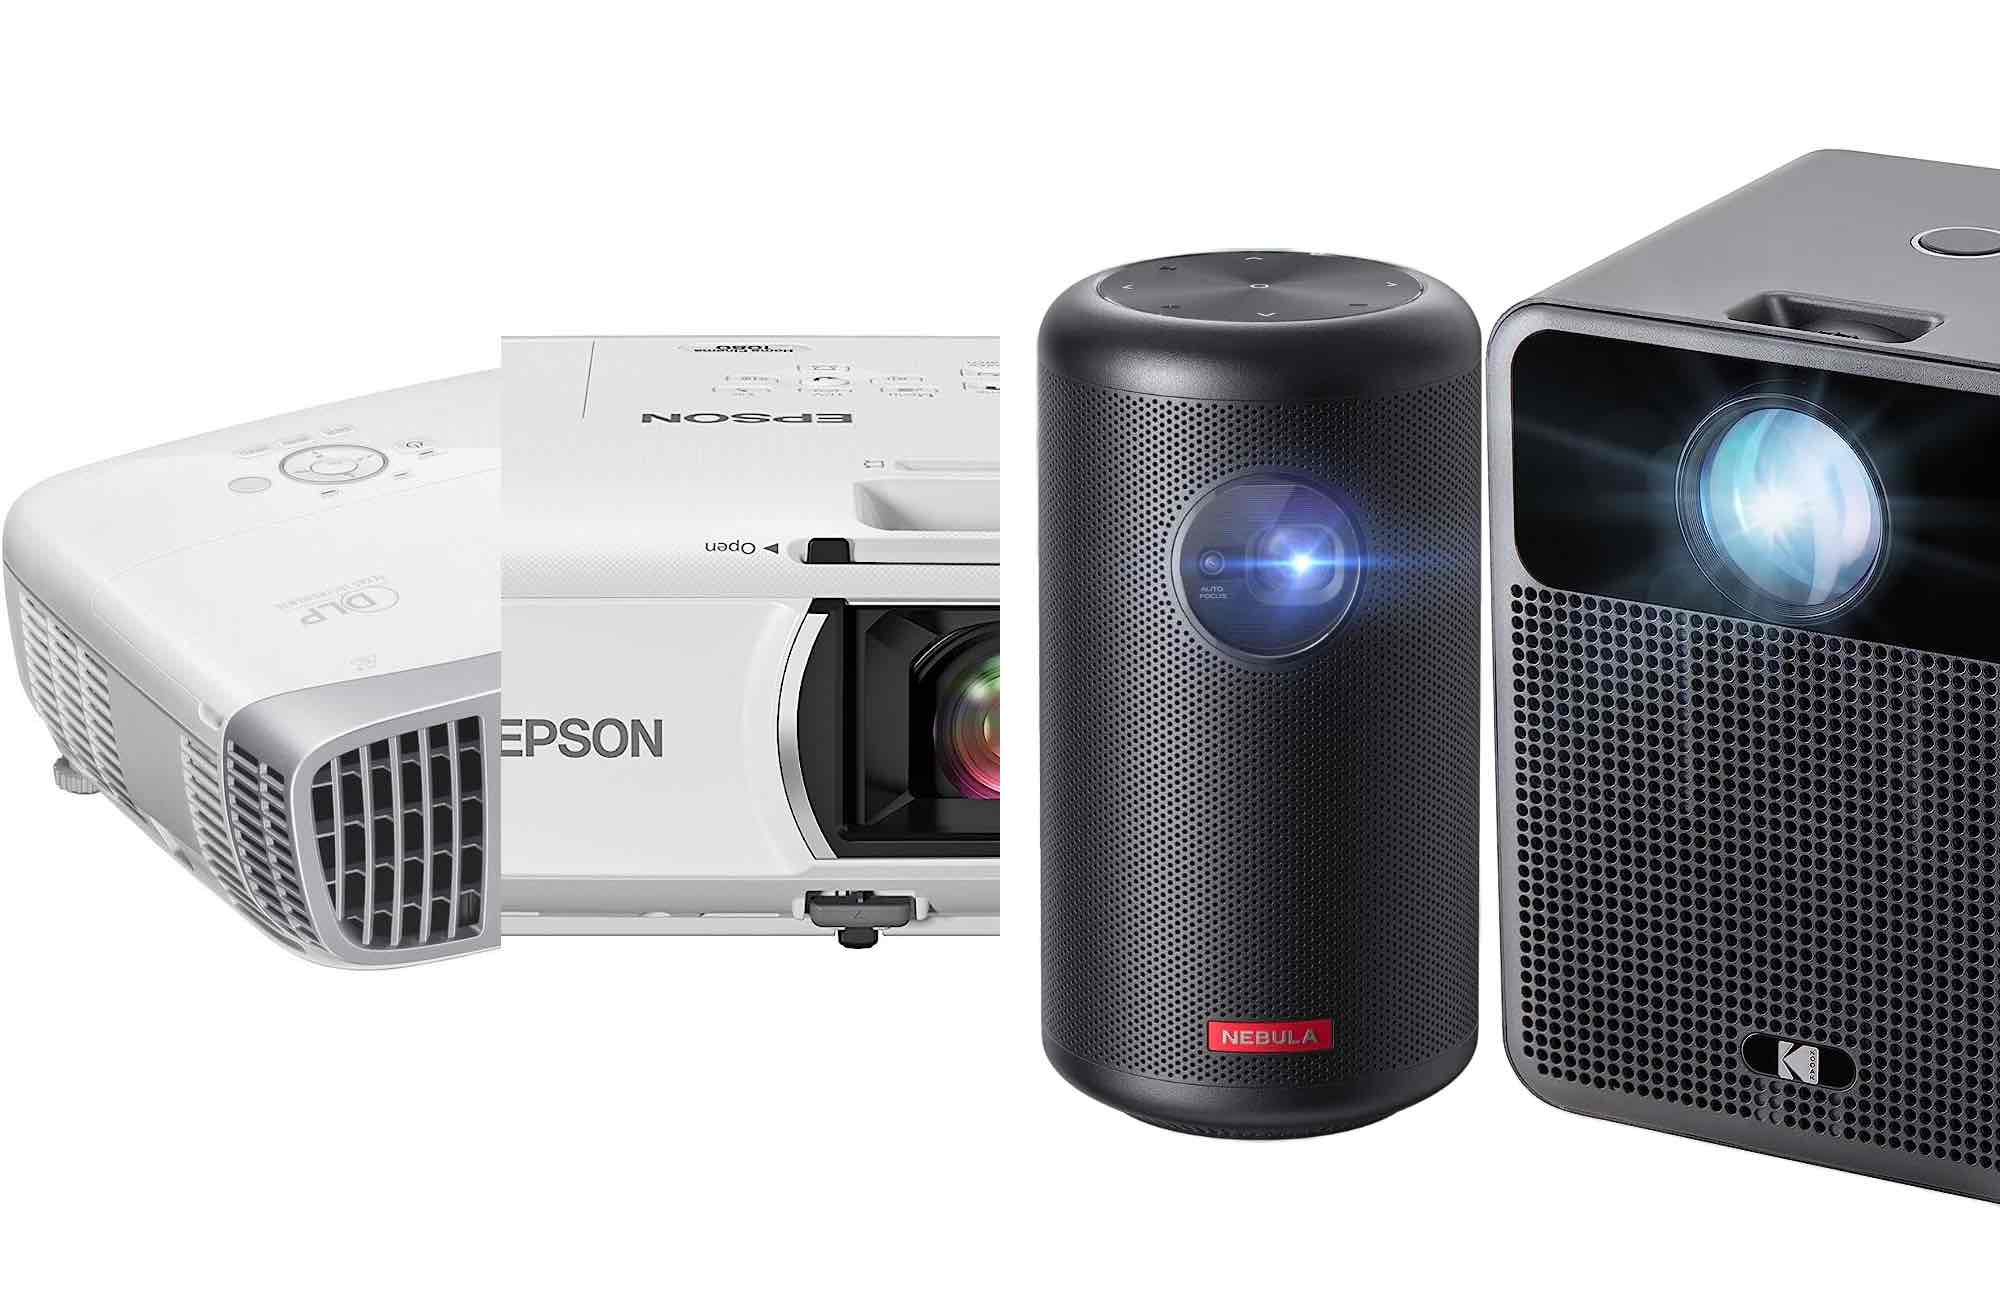 Upgrade Your Home Theater Experience With These Projector Deals - GameSpot